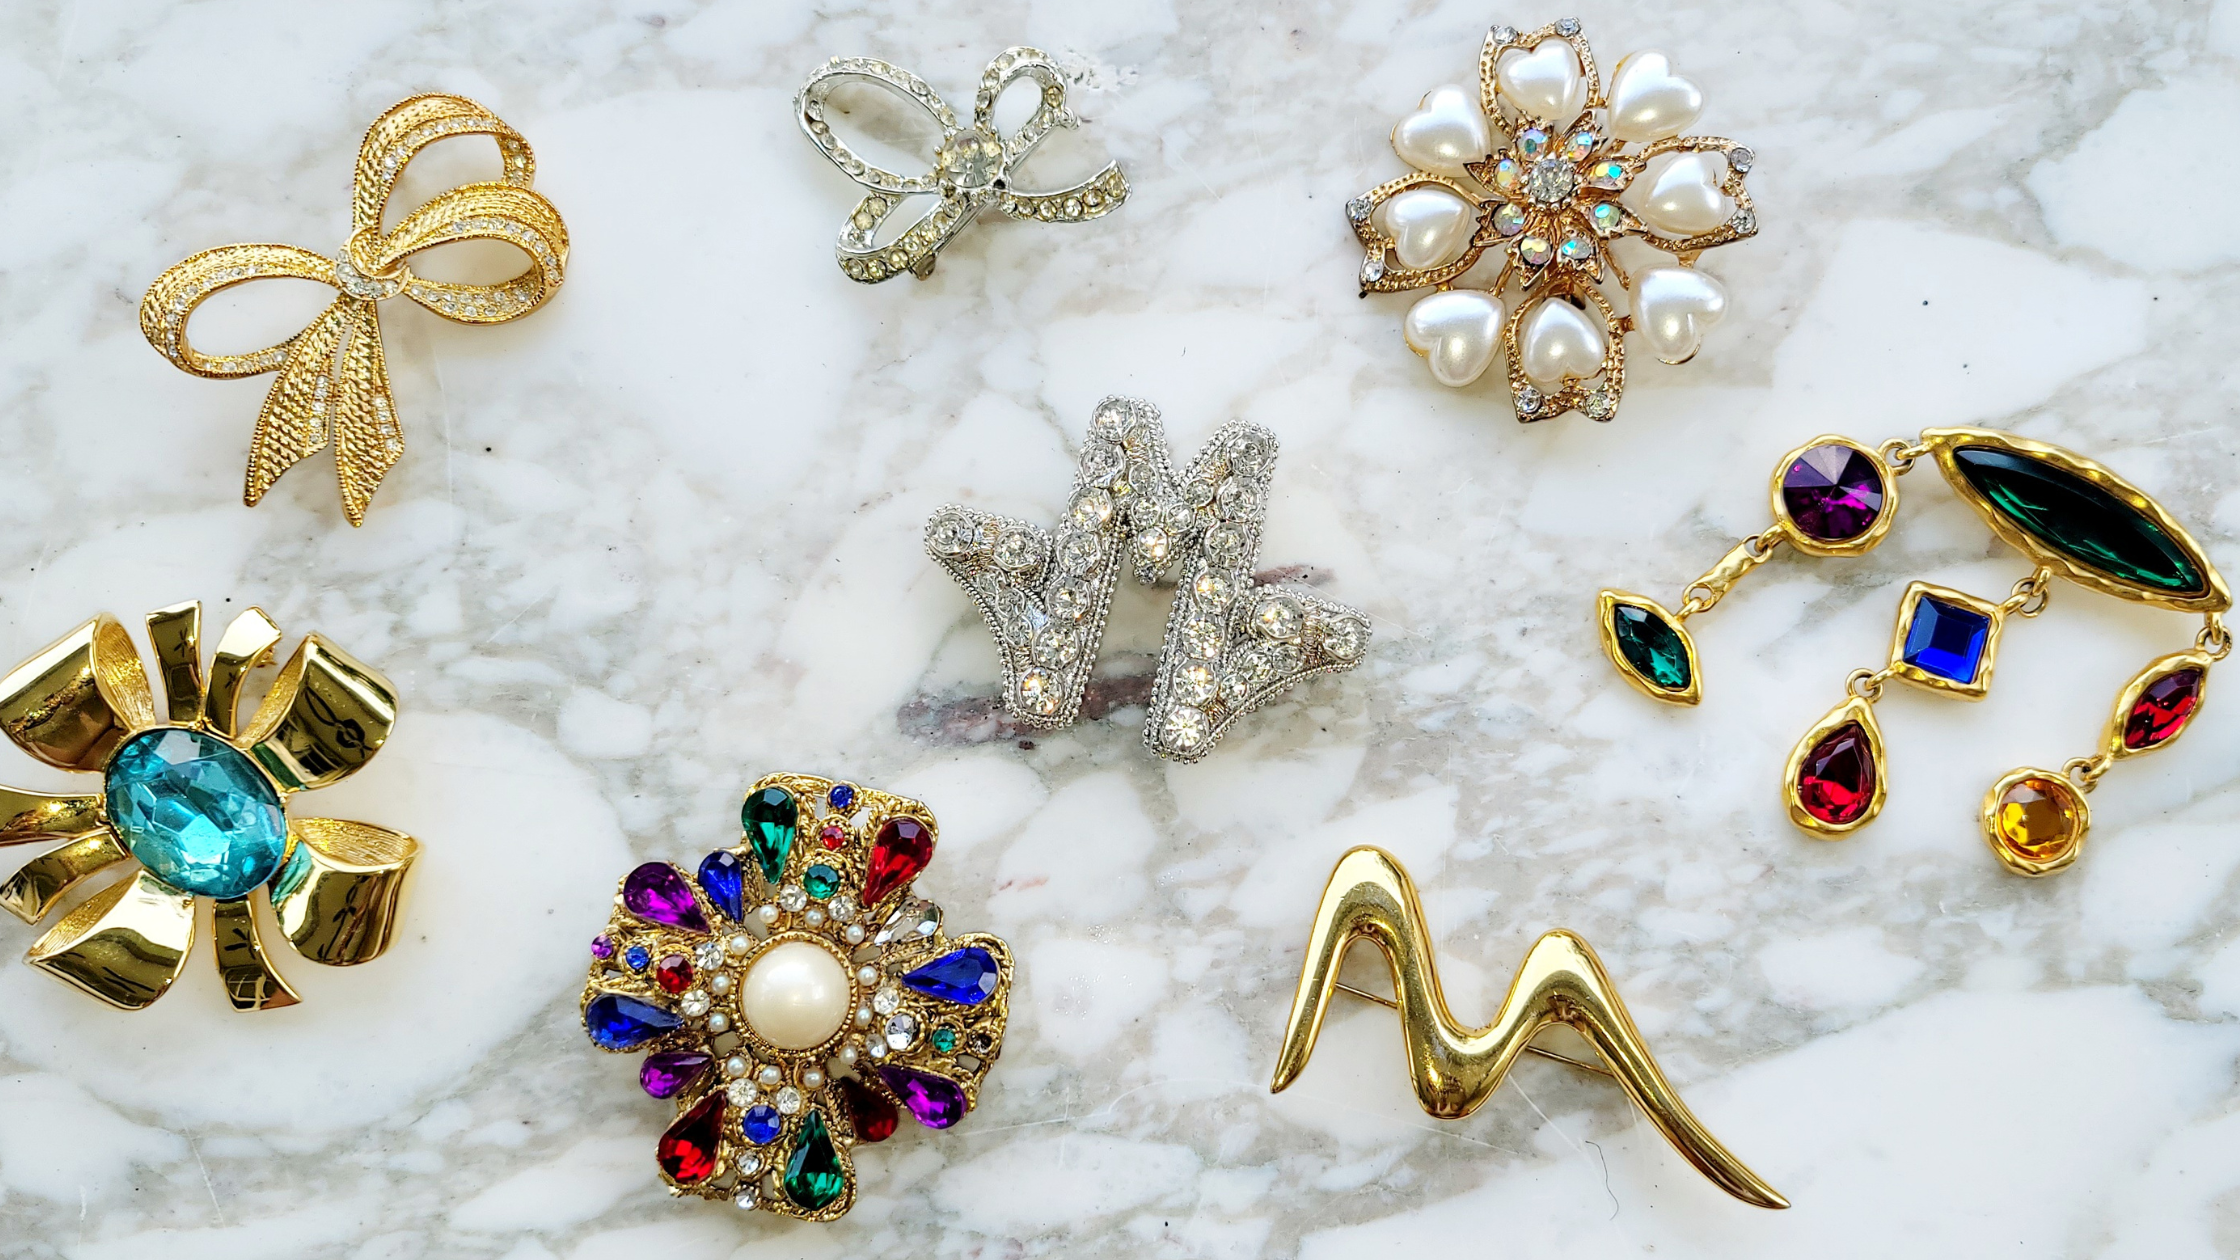 HISTORY OF BROOCHES